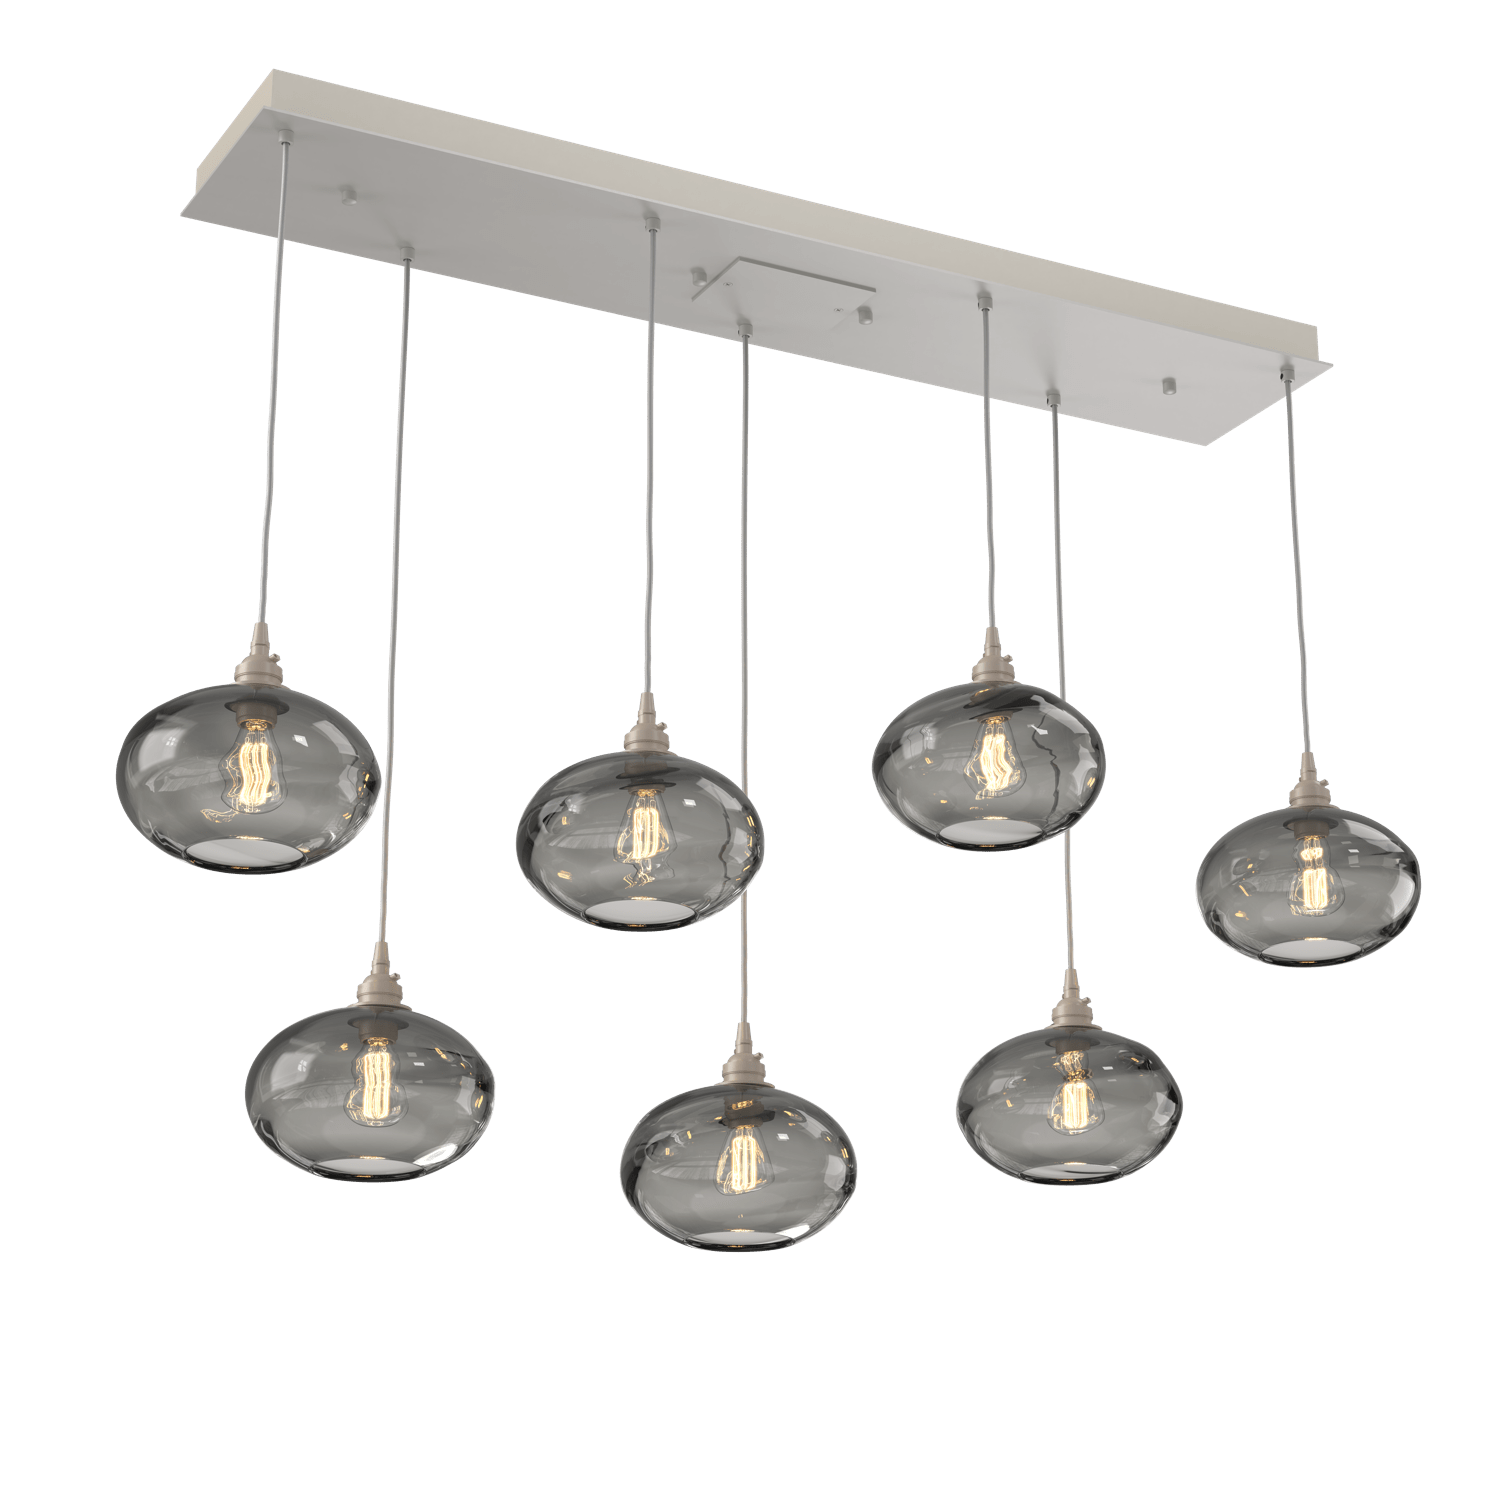 PLB0036-07-BS-OS-Hammerton-Studio-Optic-Blown-Glass-Coppa-7-light-linear-pendant-chandelier-with-metallic-beige-silver-finish-and-optic-smoke-blown-glass-shades-and-incandescent-lamping